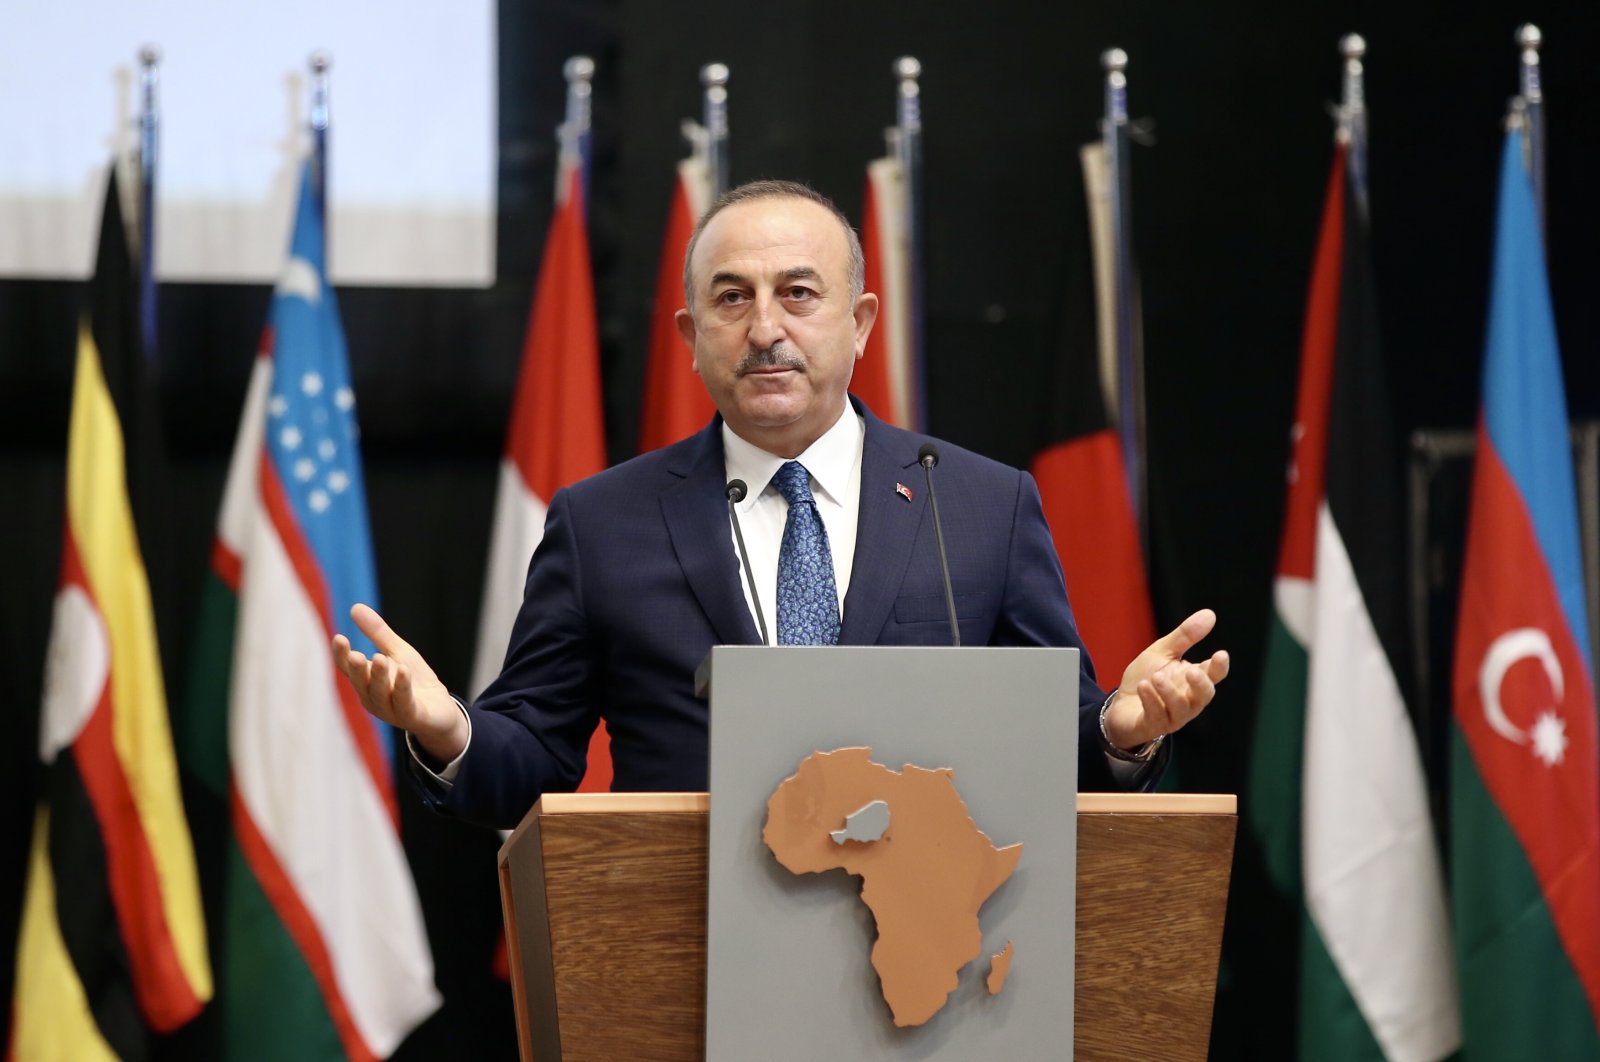 Foreign Minister Mevlüt Çavuşoğlu speaks at the 47th session of the Council of Foreign Ministers of the Organization of Islamic Cooperation (OIC) in Niger's capital Niamey, Nov. 27, 2020. (AA)